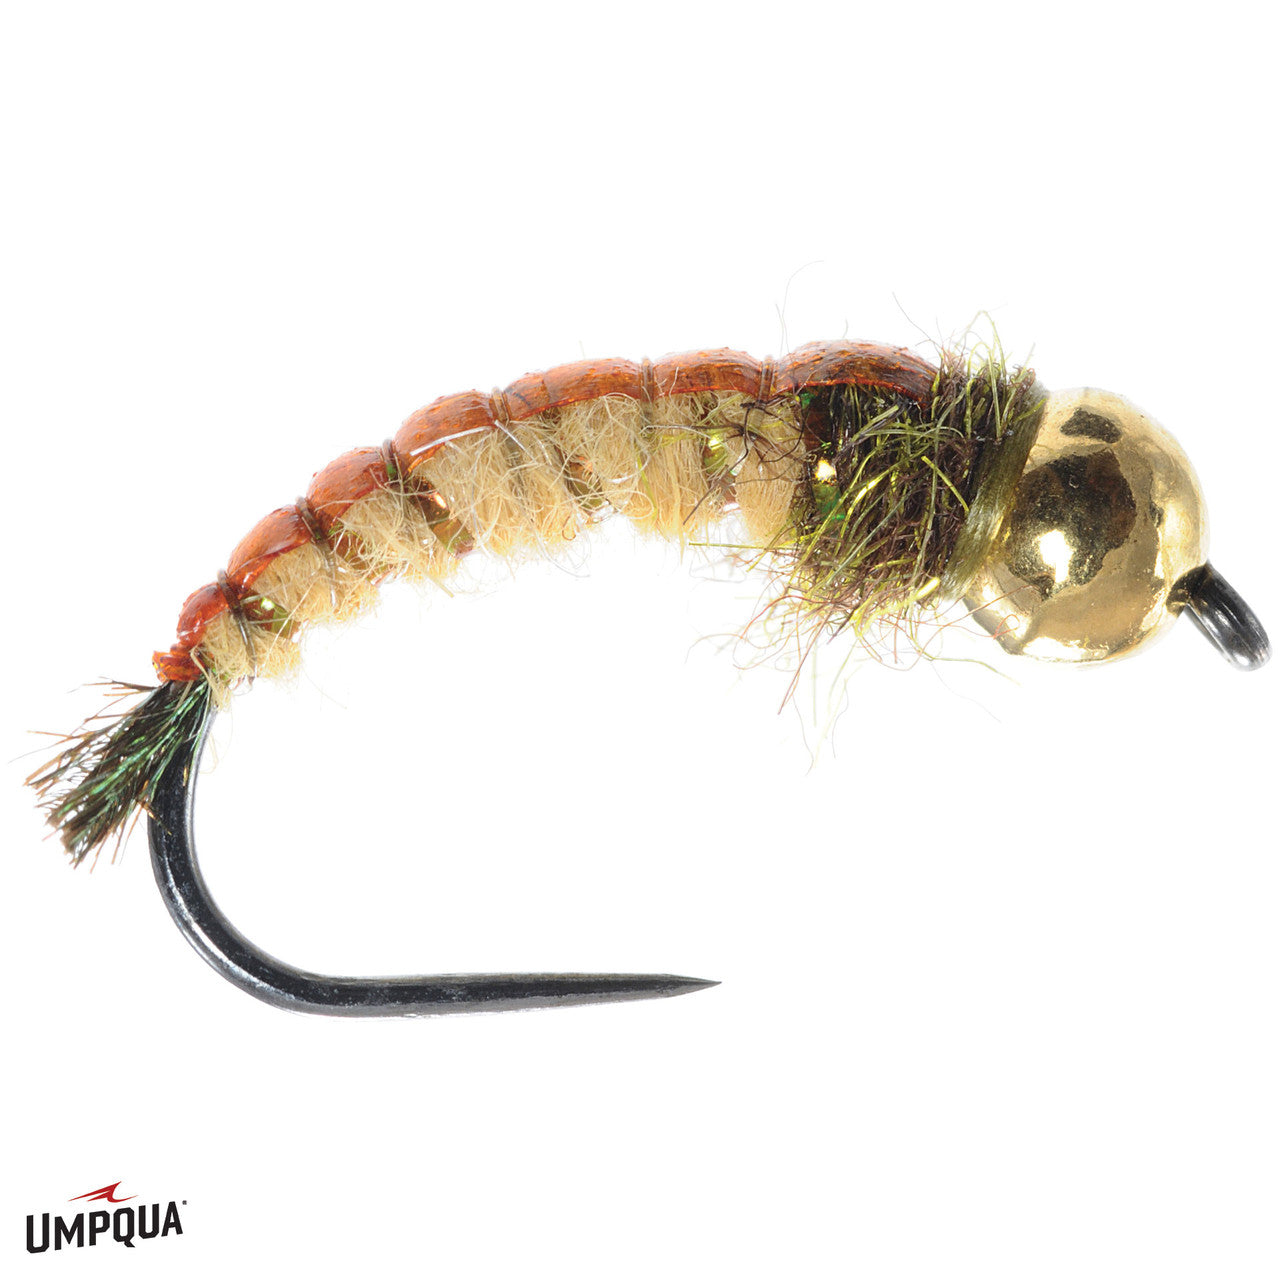 Lance Egan's GTI Caddis (Amber and Cream) – Tactical Fly Fisher